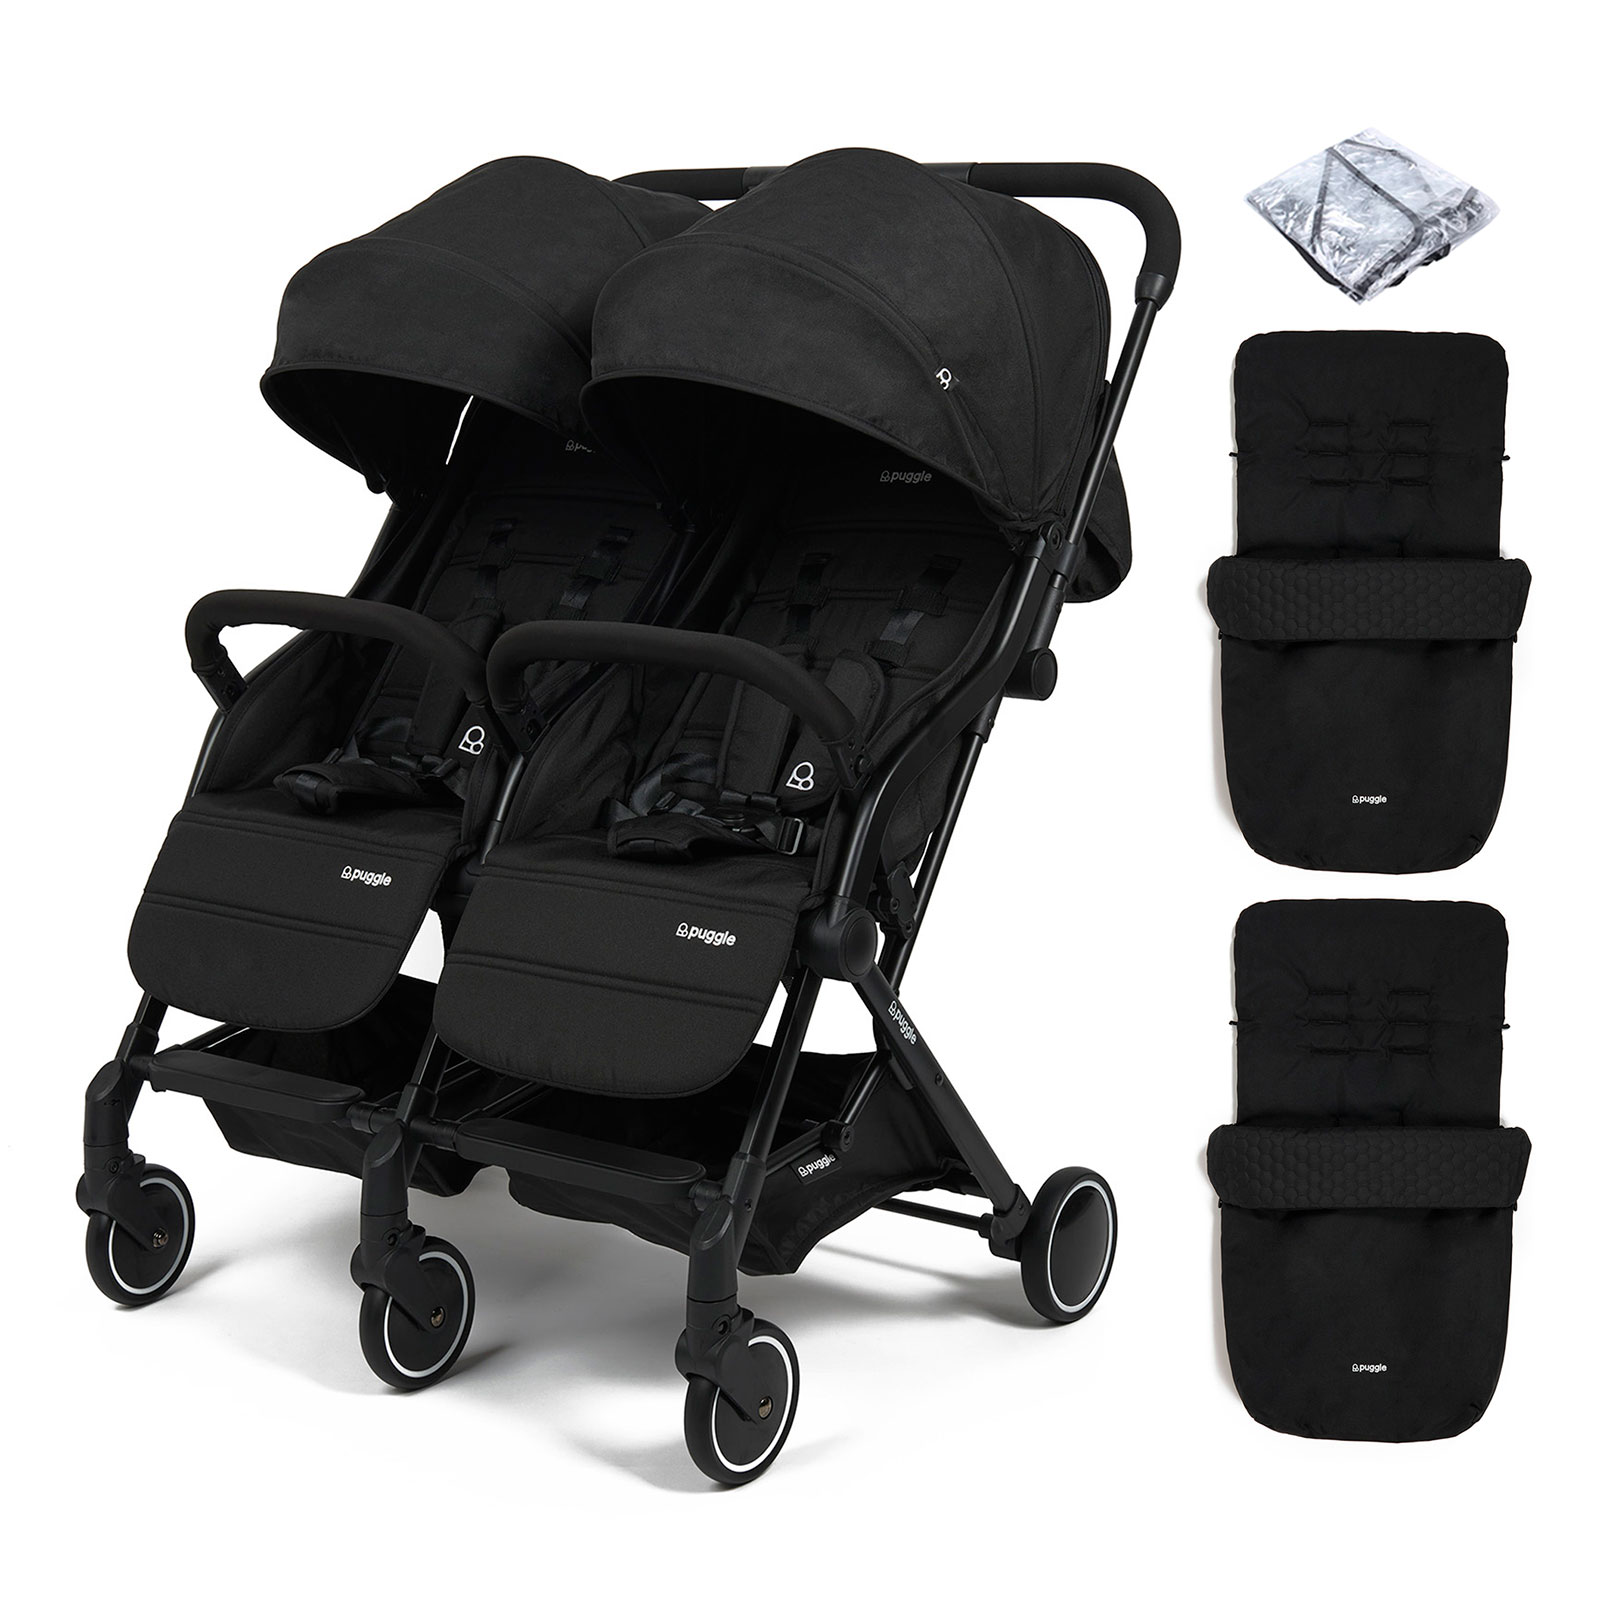 Puggle City Traveller Compact Fold Twin Pushchair with 2 Footmuffs – Storm Black